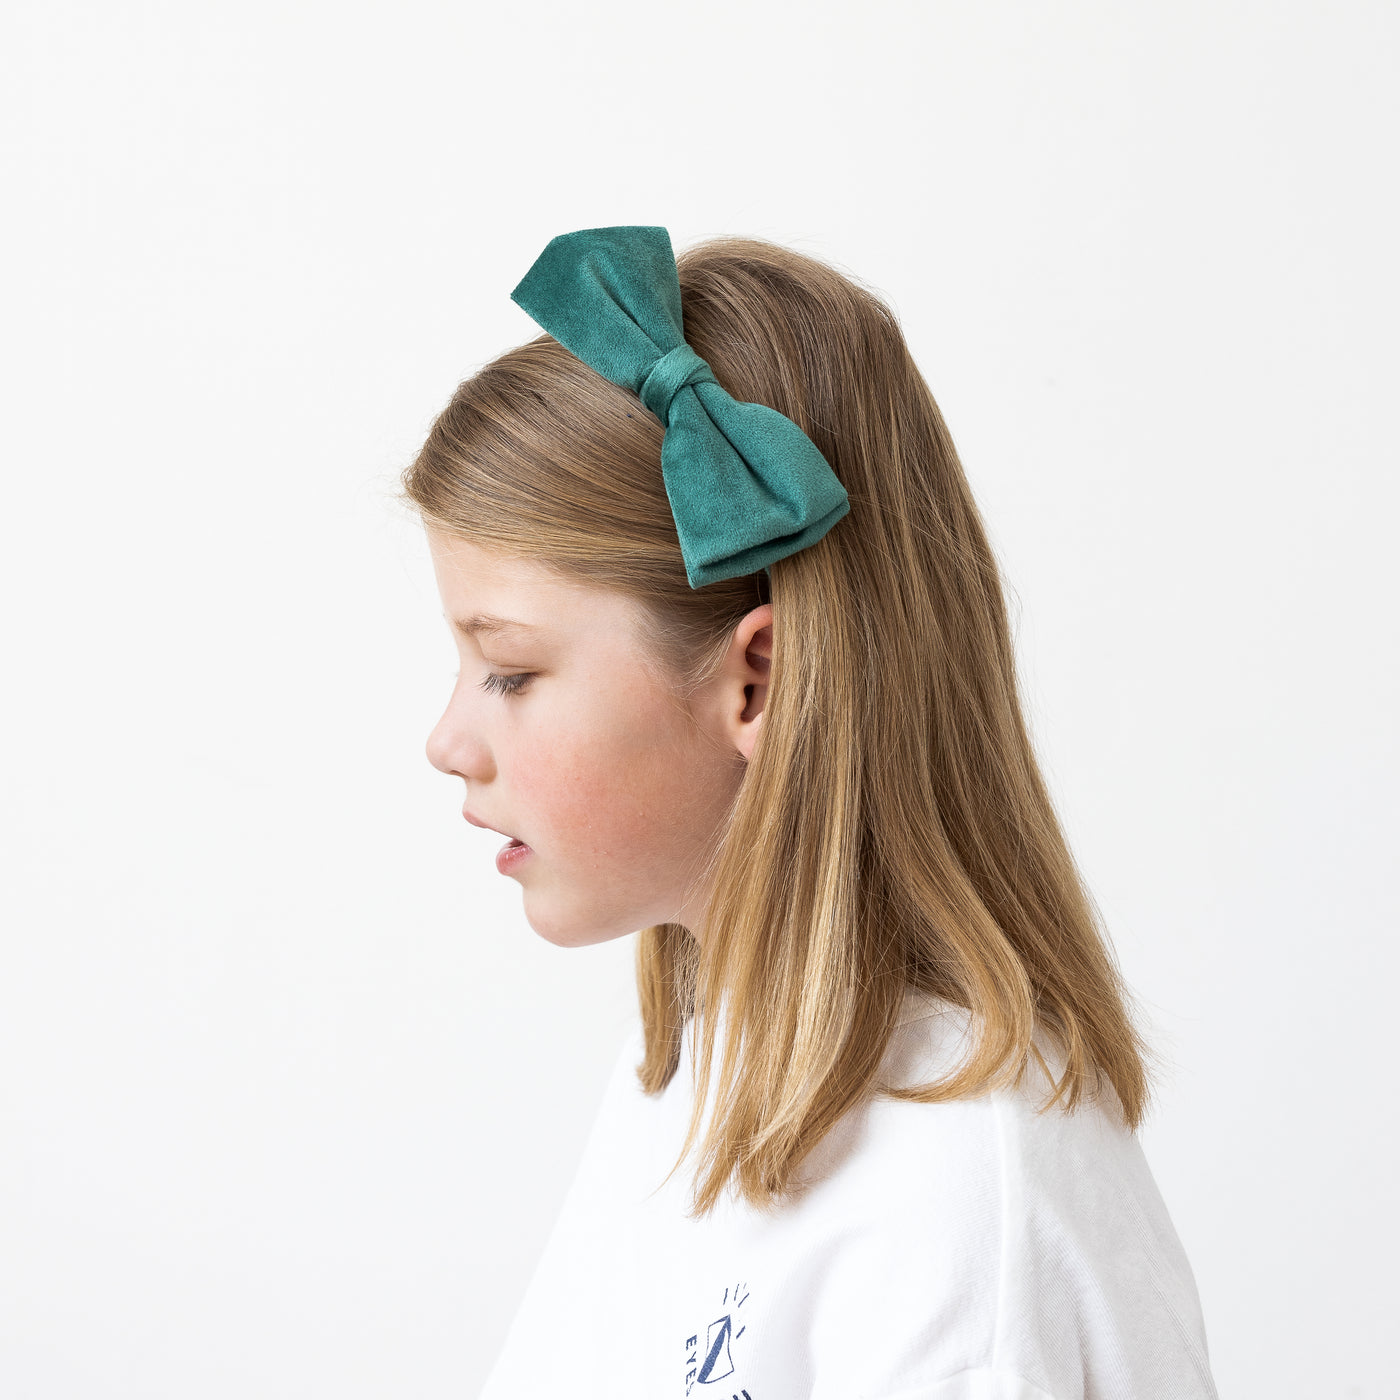 Little girl looking downwards wearing a velvet green bow Alice band